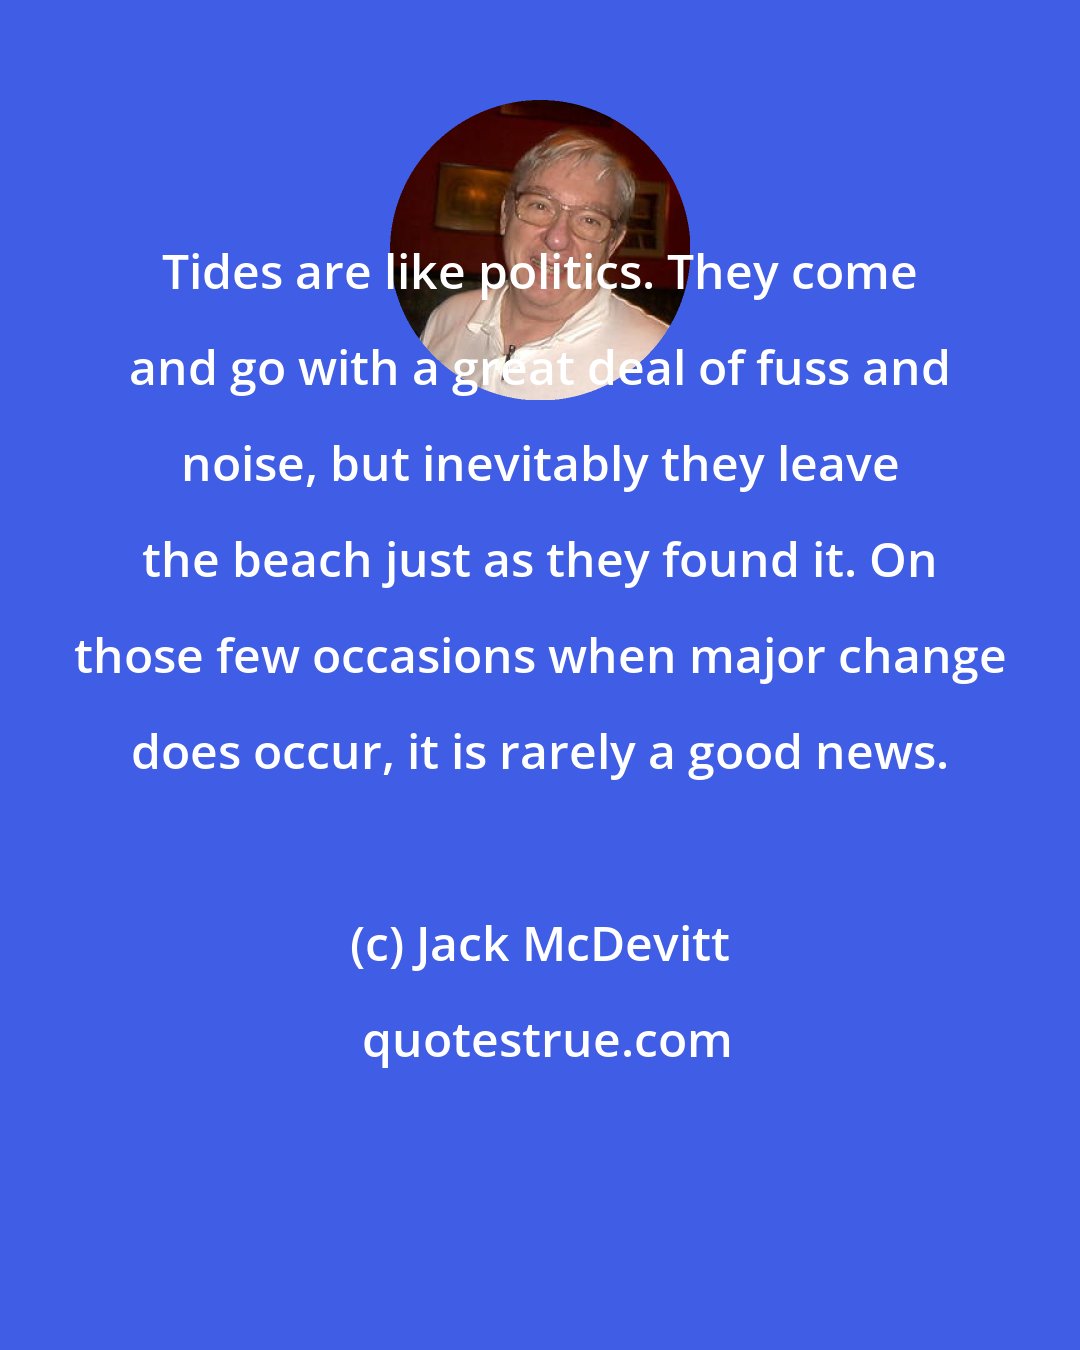 Jack McDevitt: Tides are like politics. They come and go with a great deal of fuss and noise, but inevitably they leave the beach just as they found it. On those few occasions when major change does occur, it is rarely a good news.